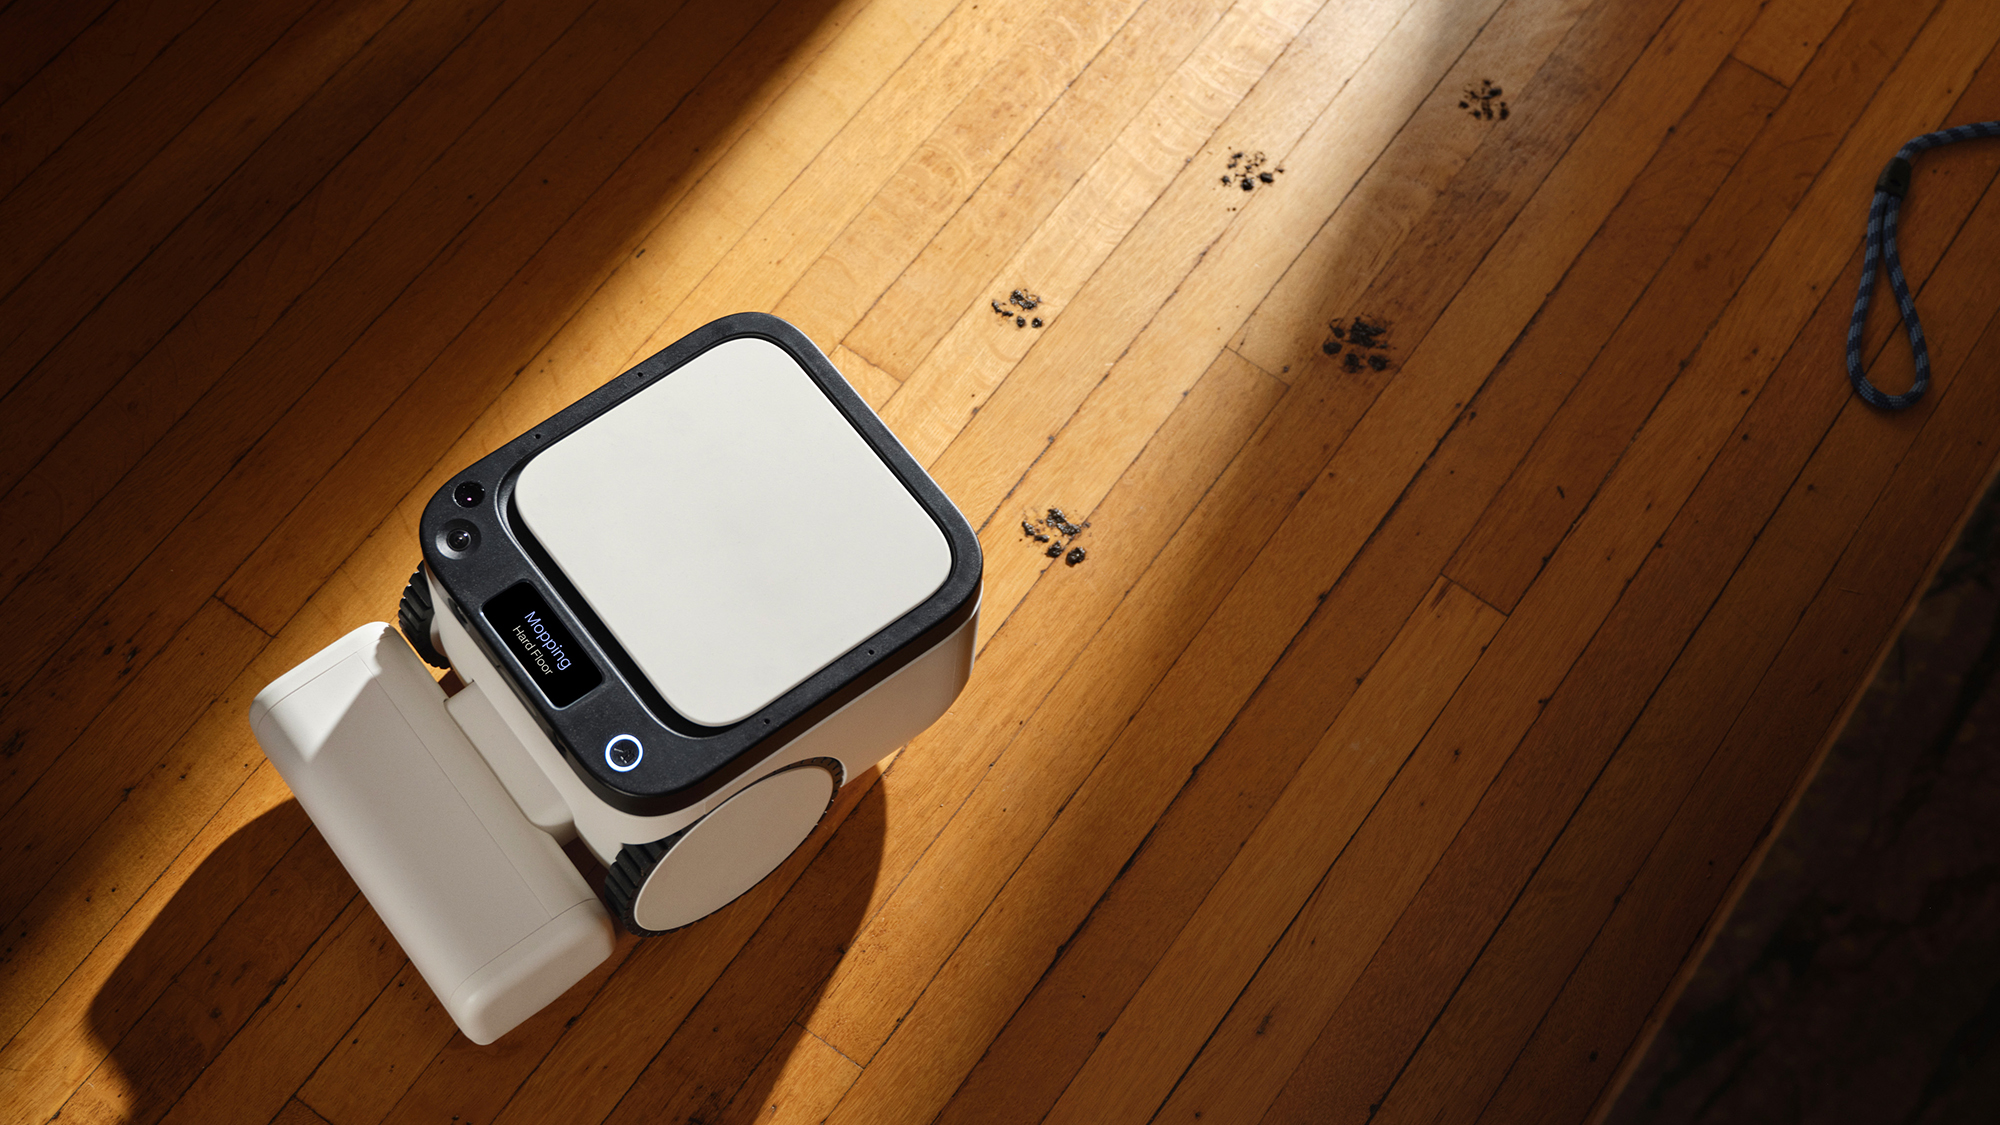 The Matic robot vacuum on a wooden floor